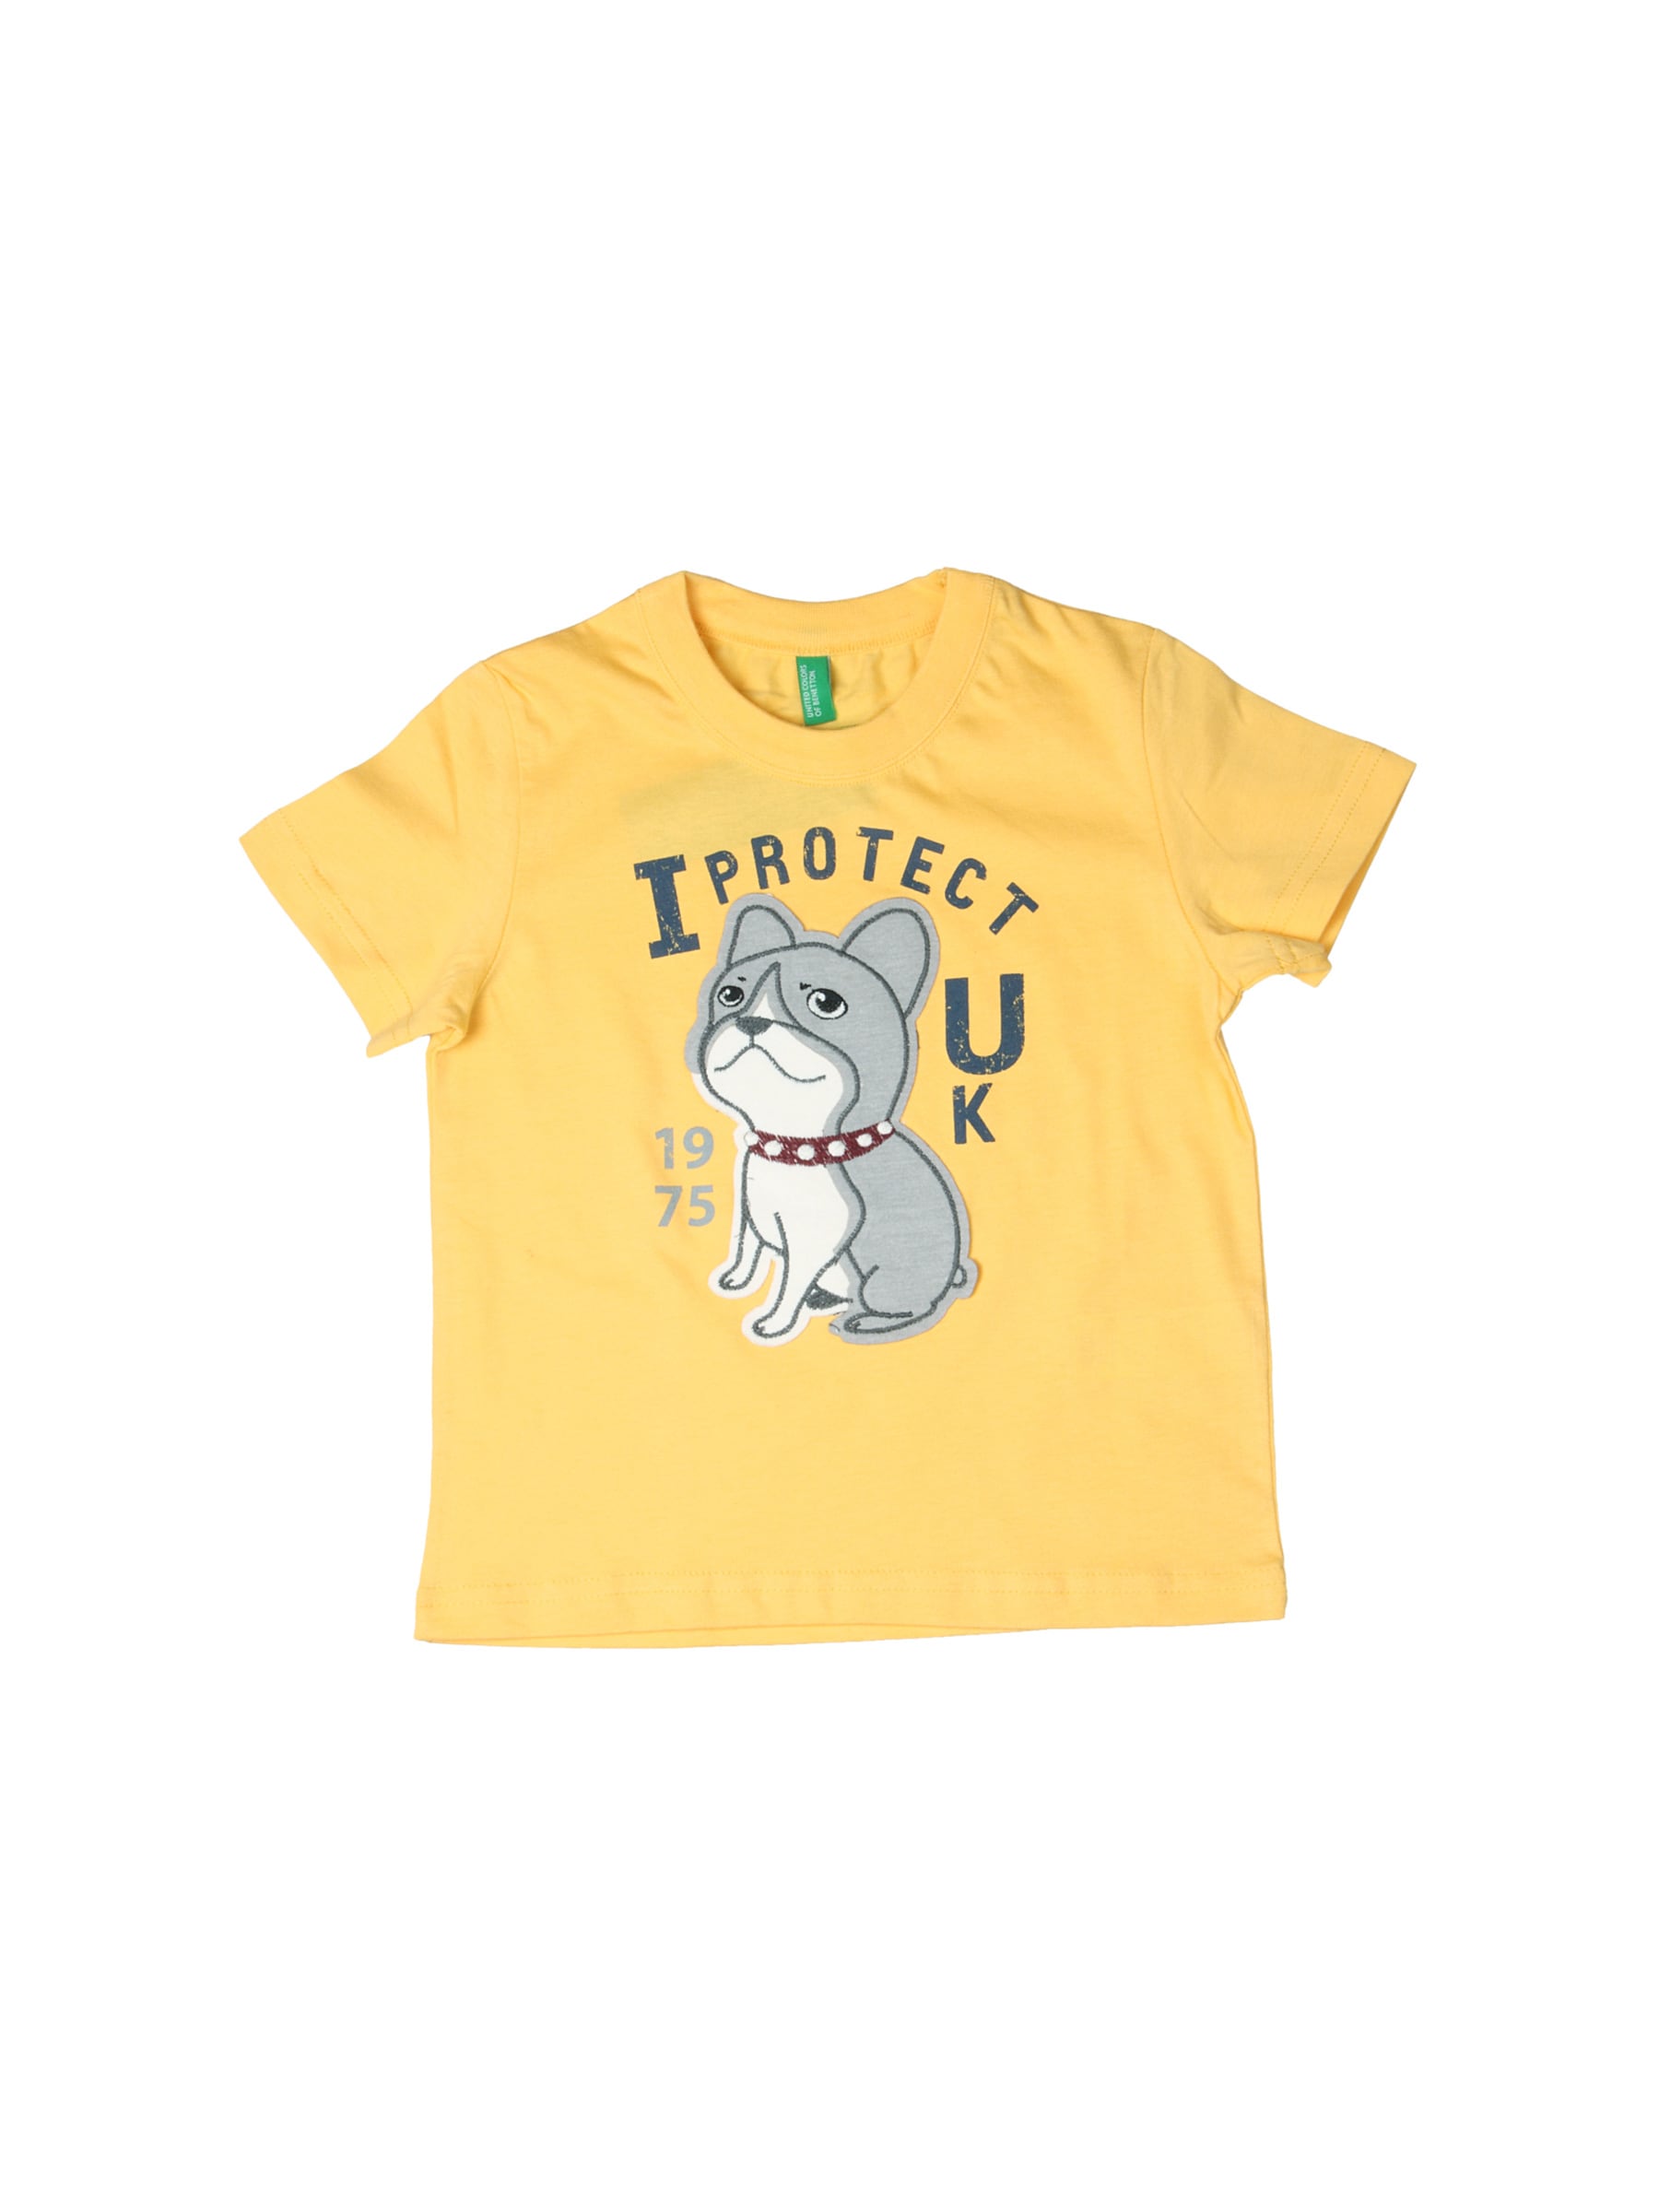 United Colors of Benetton Kids Boys Yellow Printed T-shirt